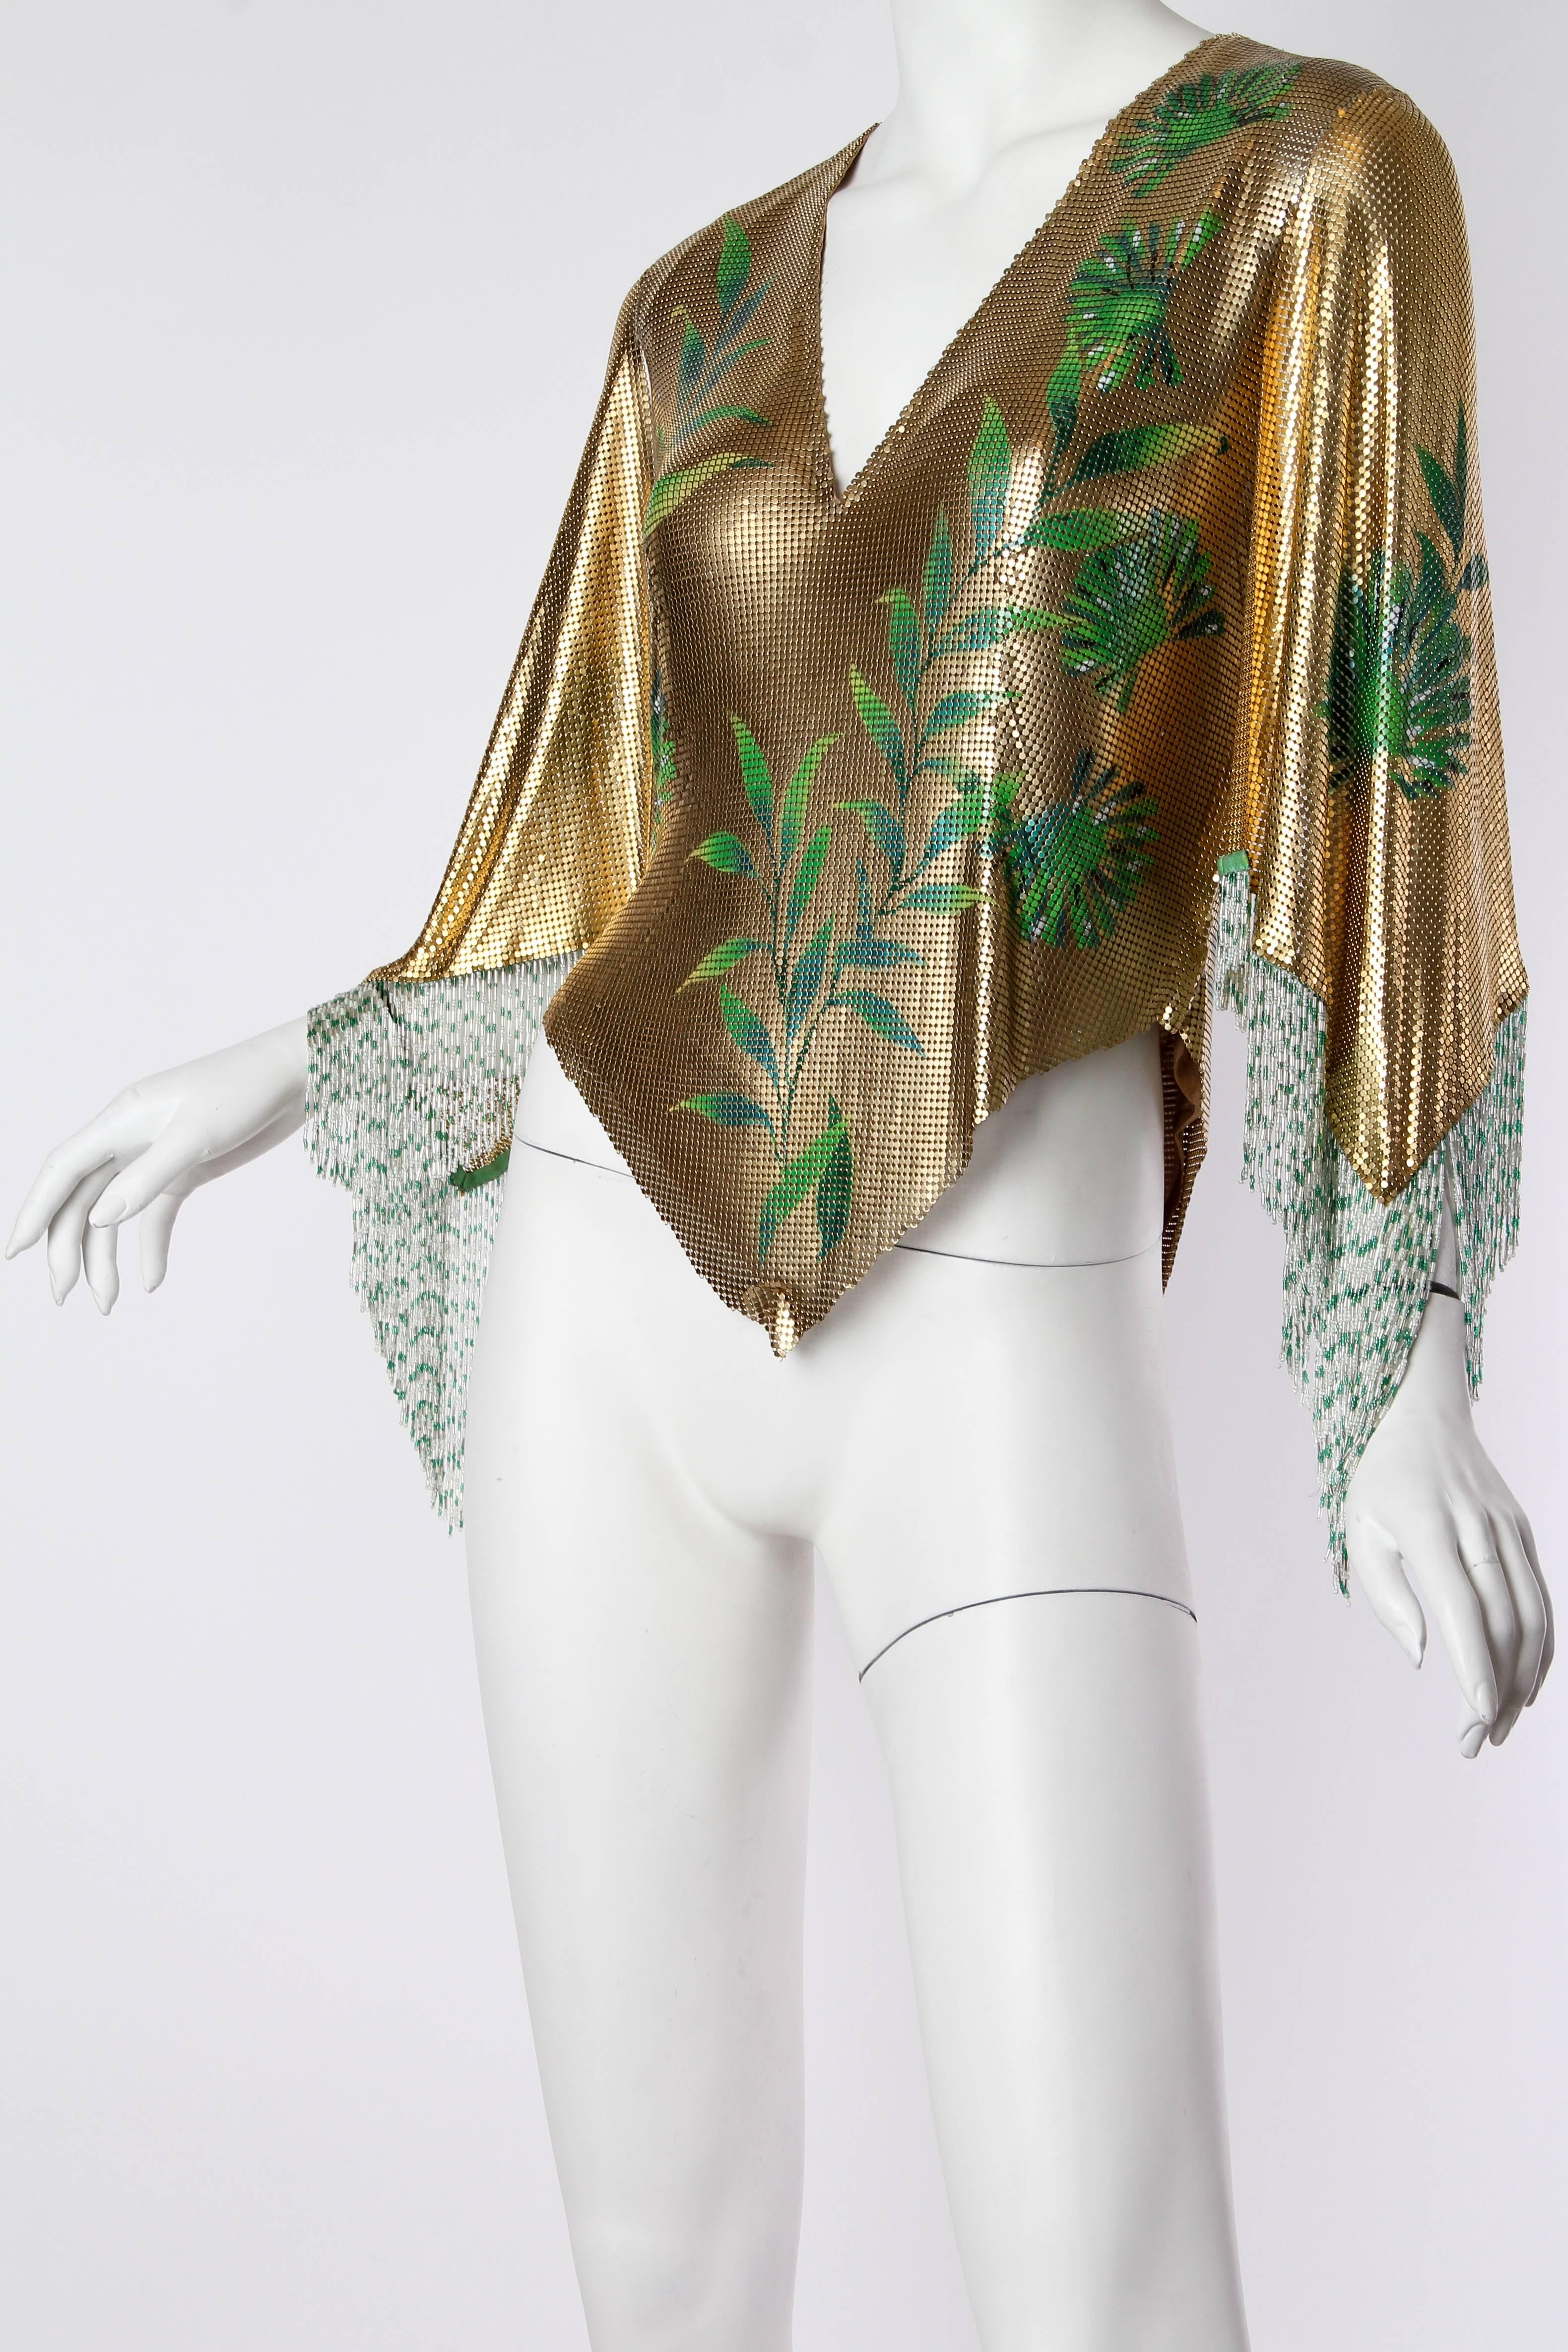 Exceptionally Rare Hand Painted Gianni Versace Couture Metal Mesh Top 1